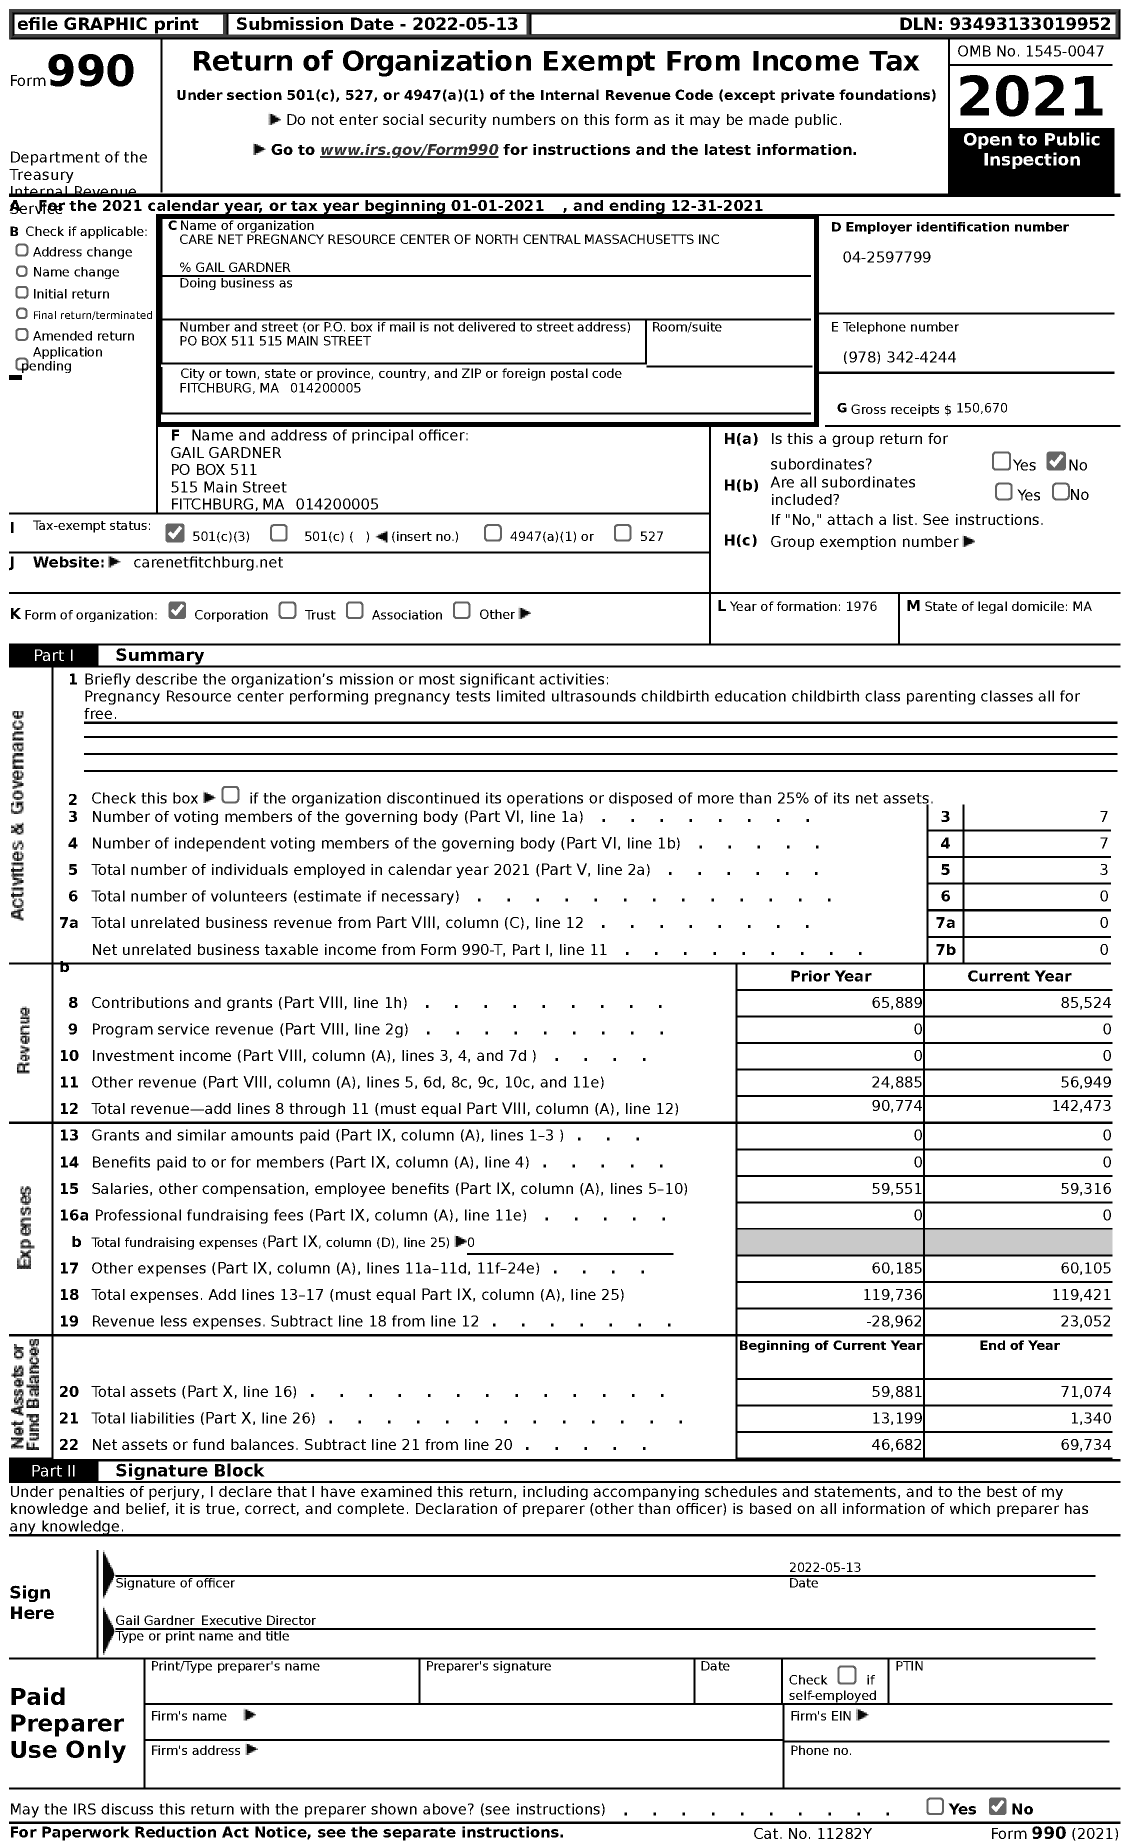 Image of first page of 2021 Form 990 for Carenet Net Pregnancy Resource Center of North Central Massachusetts